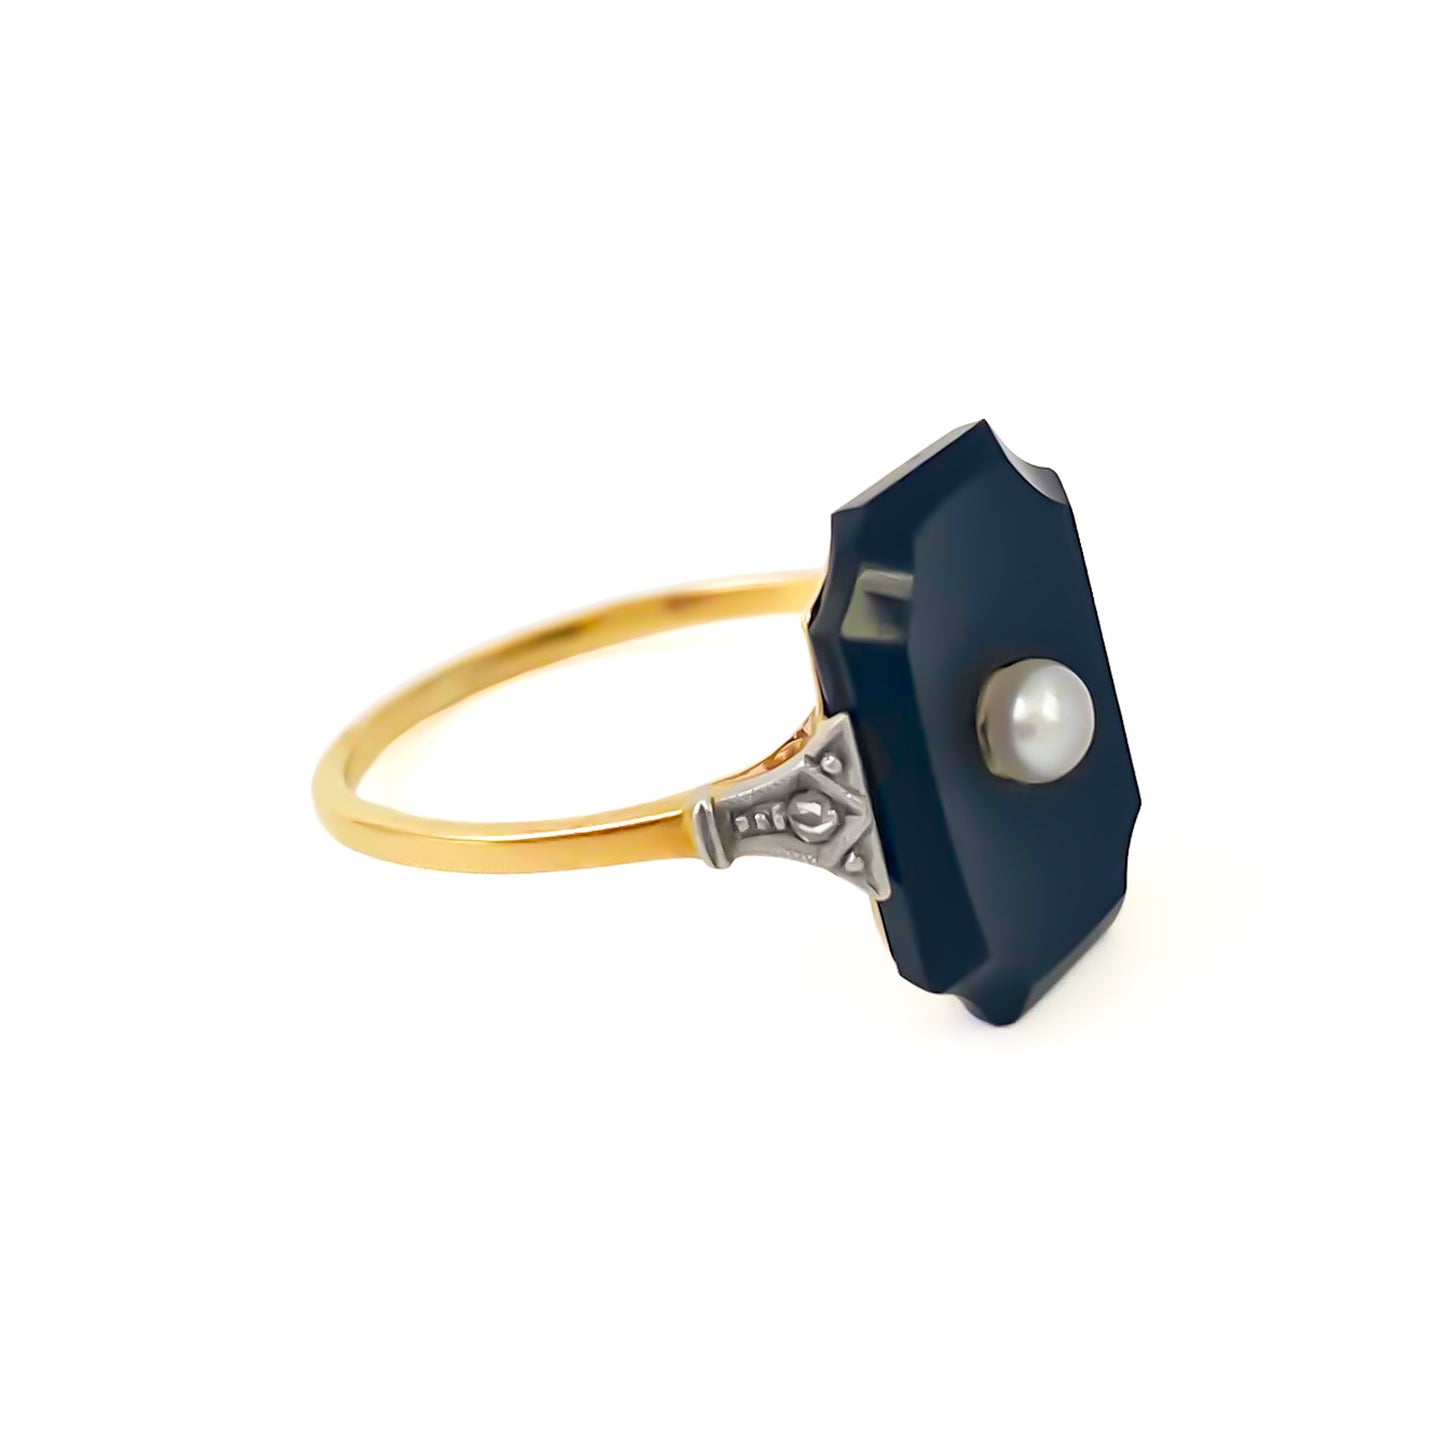 Stylish 18ct gold Art Deco onyx ring set with a single seed pearl and a mine cut diamond on each shoulder.